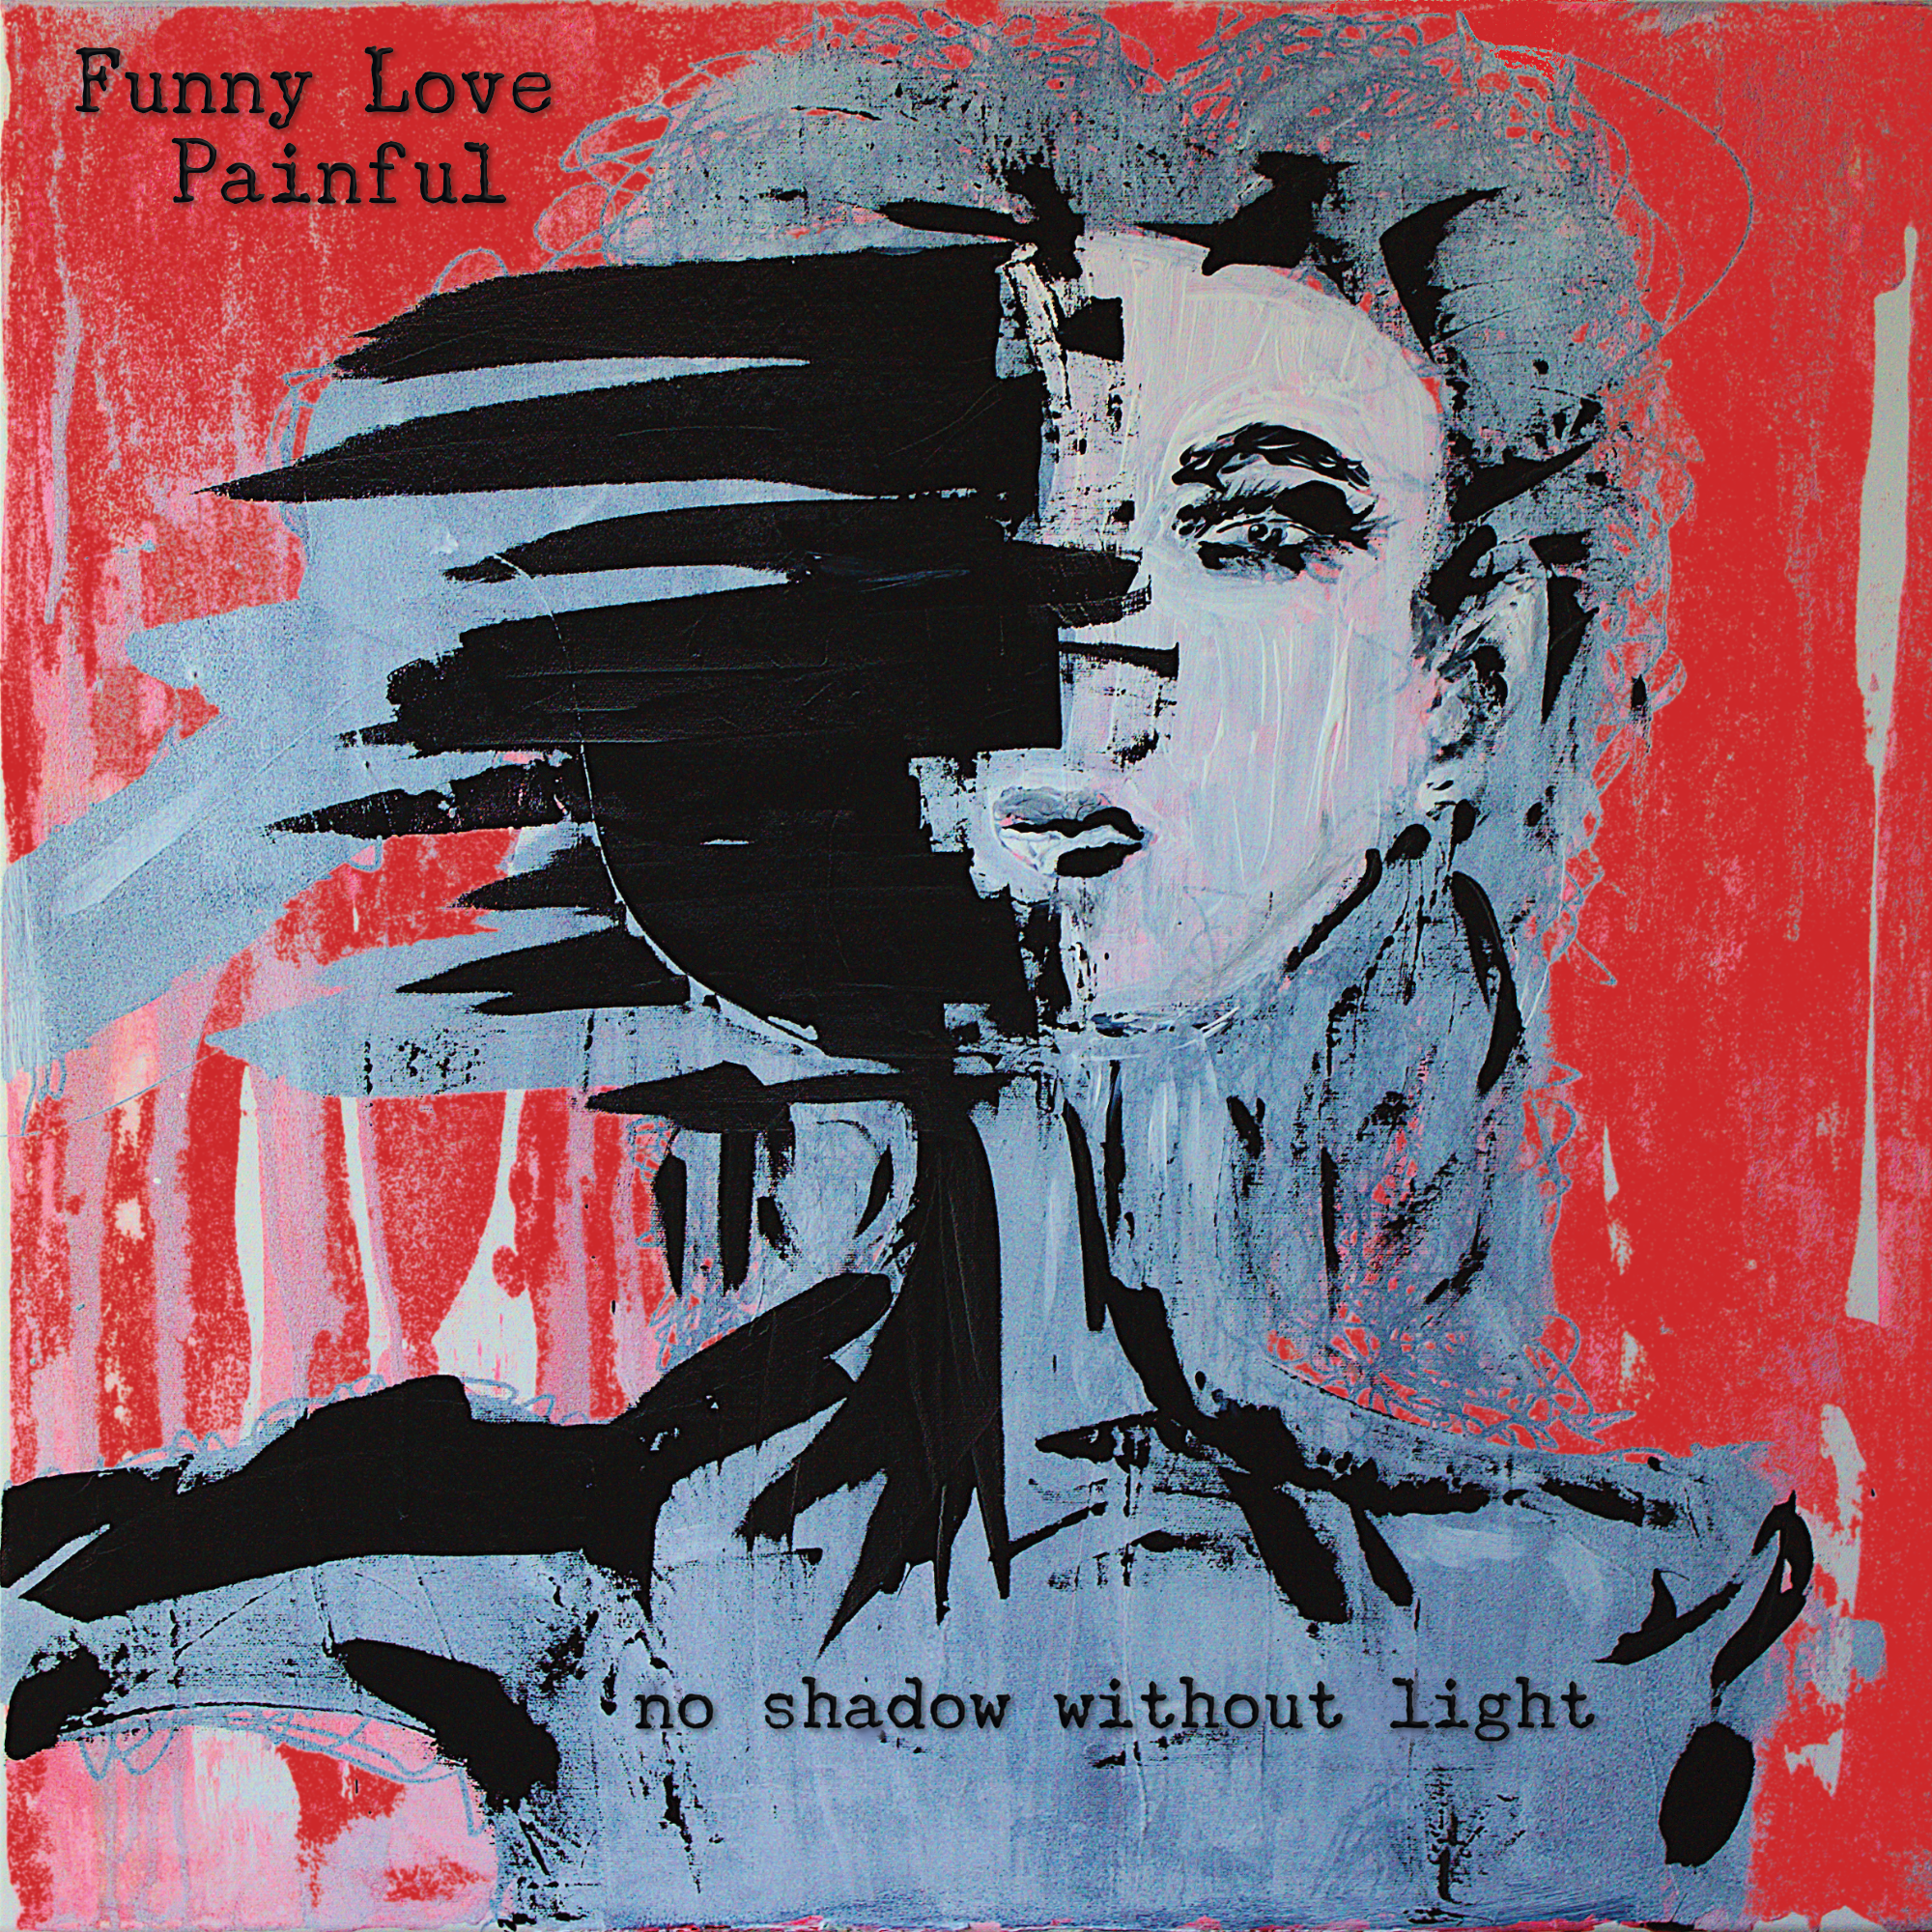 FUNNY LOVE PAINFUL (DE) – No Shadow Without Light